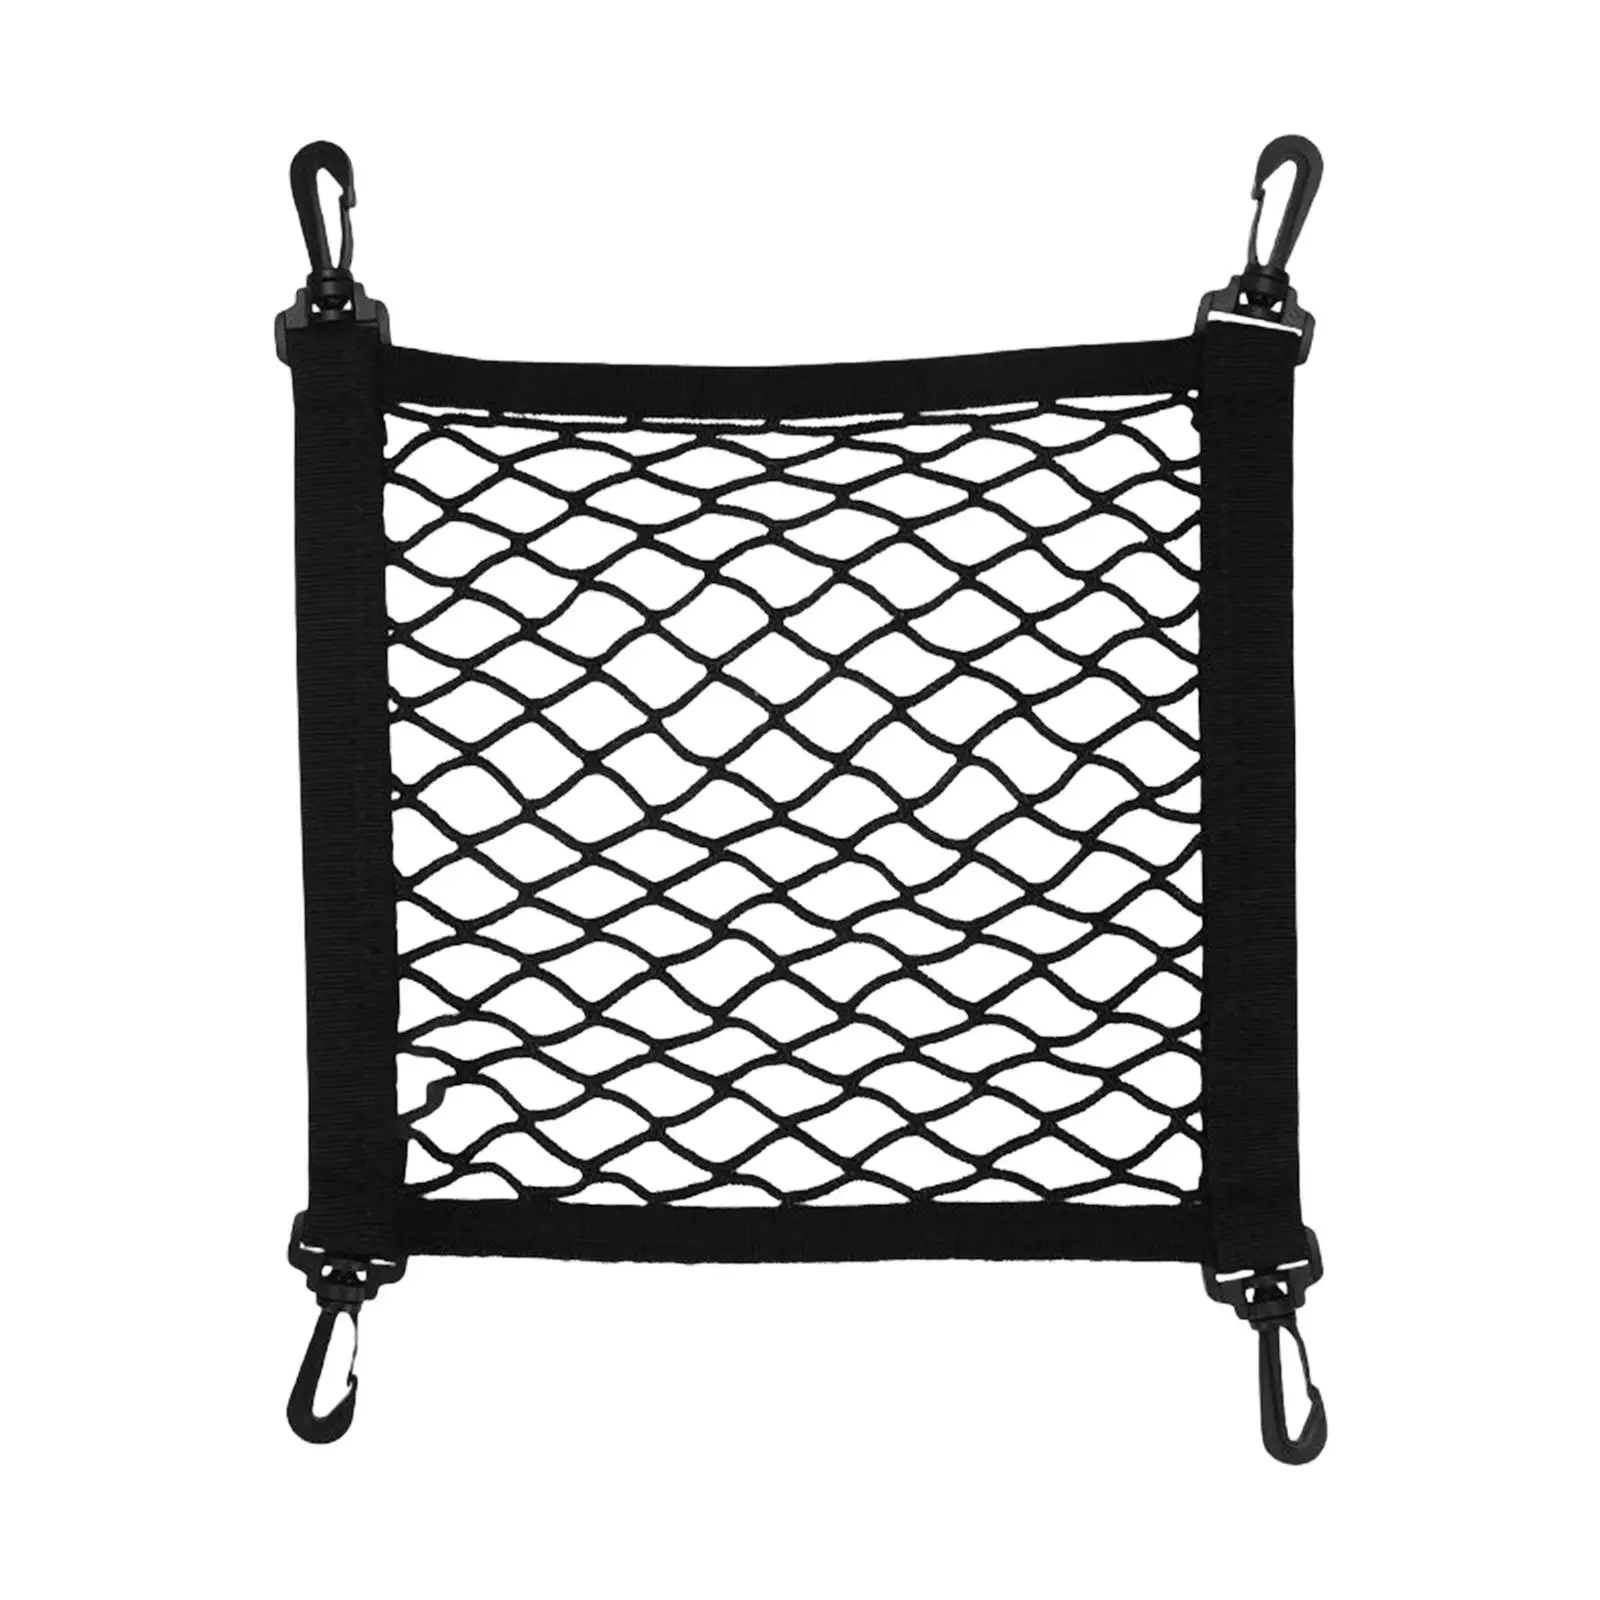 Single Layer Electric Vehicle Net Mesh Bag Heavy Duty Car Accessories Stretchable with Hook Durable for for for U+ for US for U1